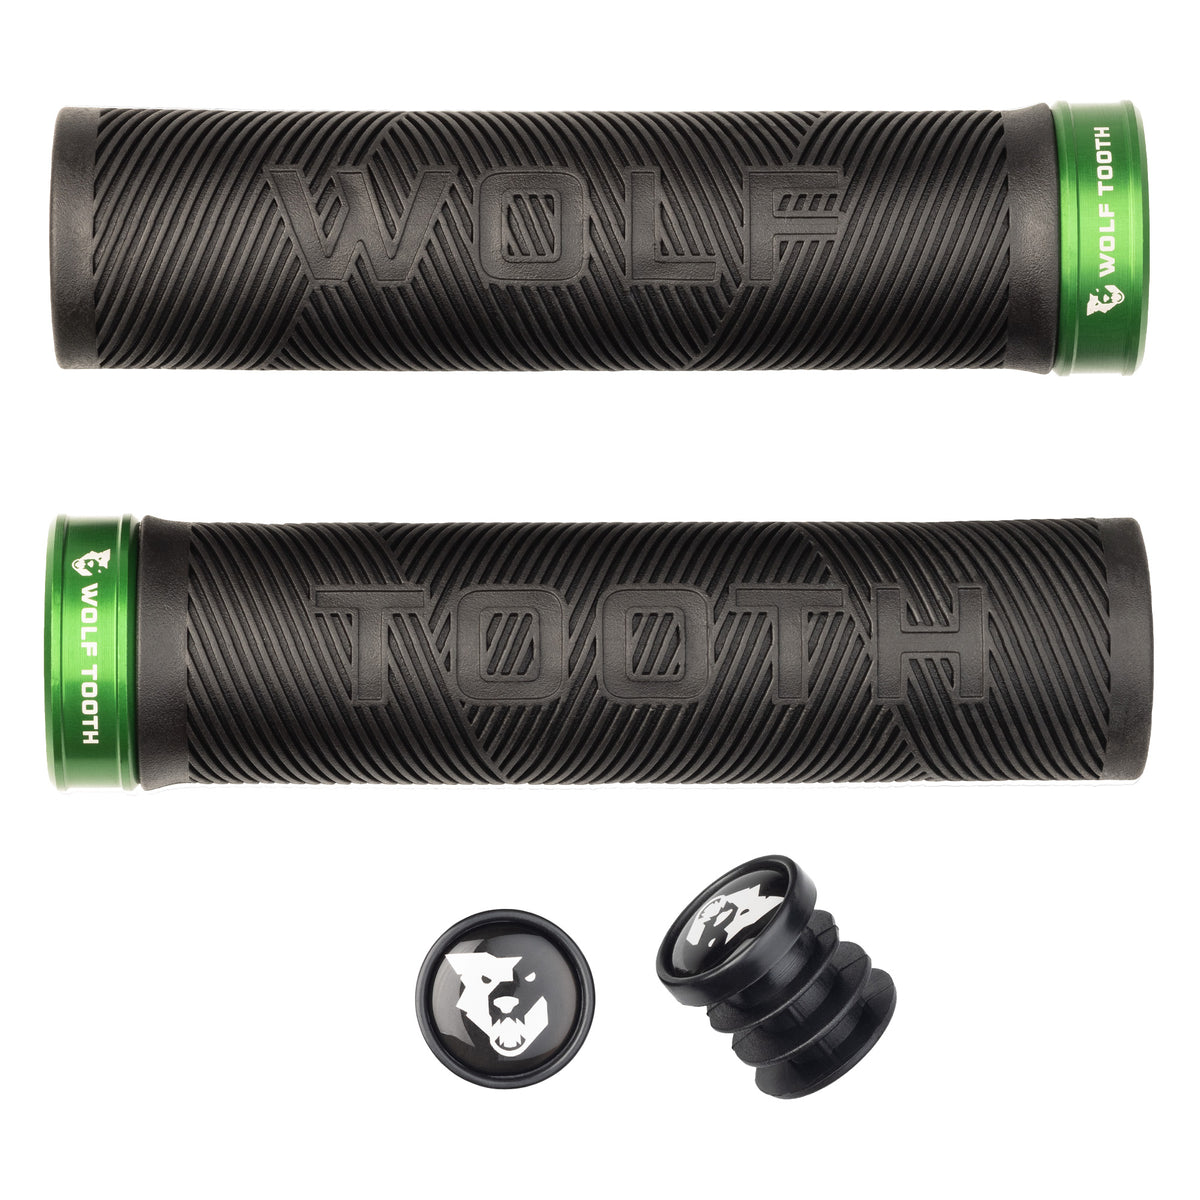 Echo Lock-On Grips - Wolf Tooth Components